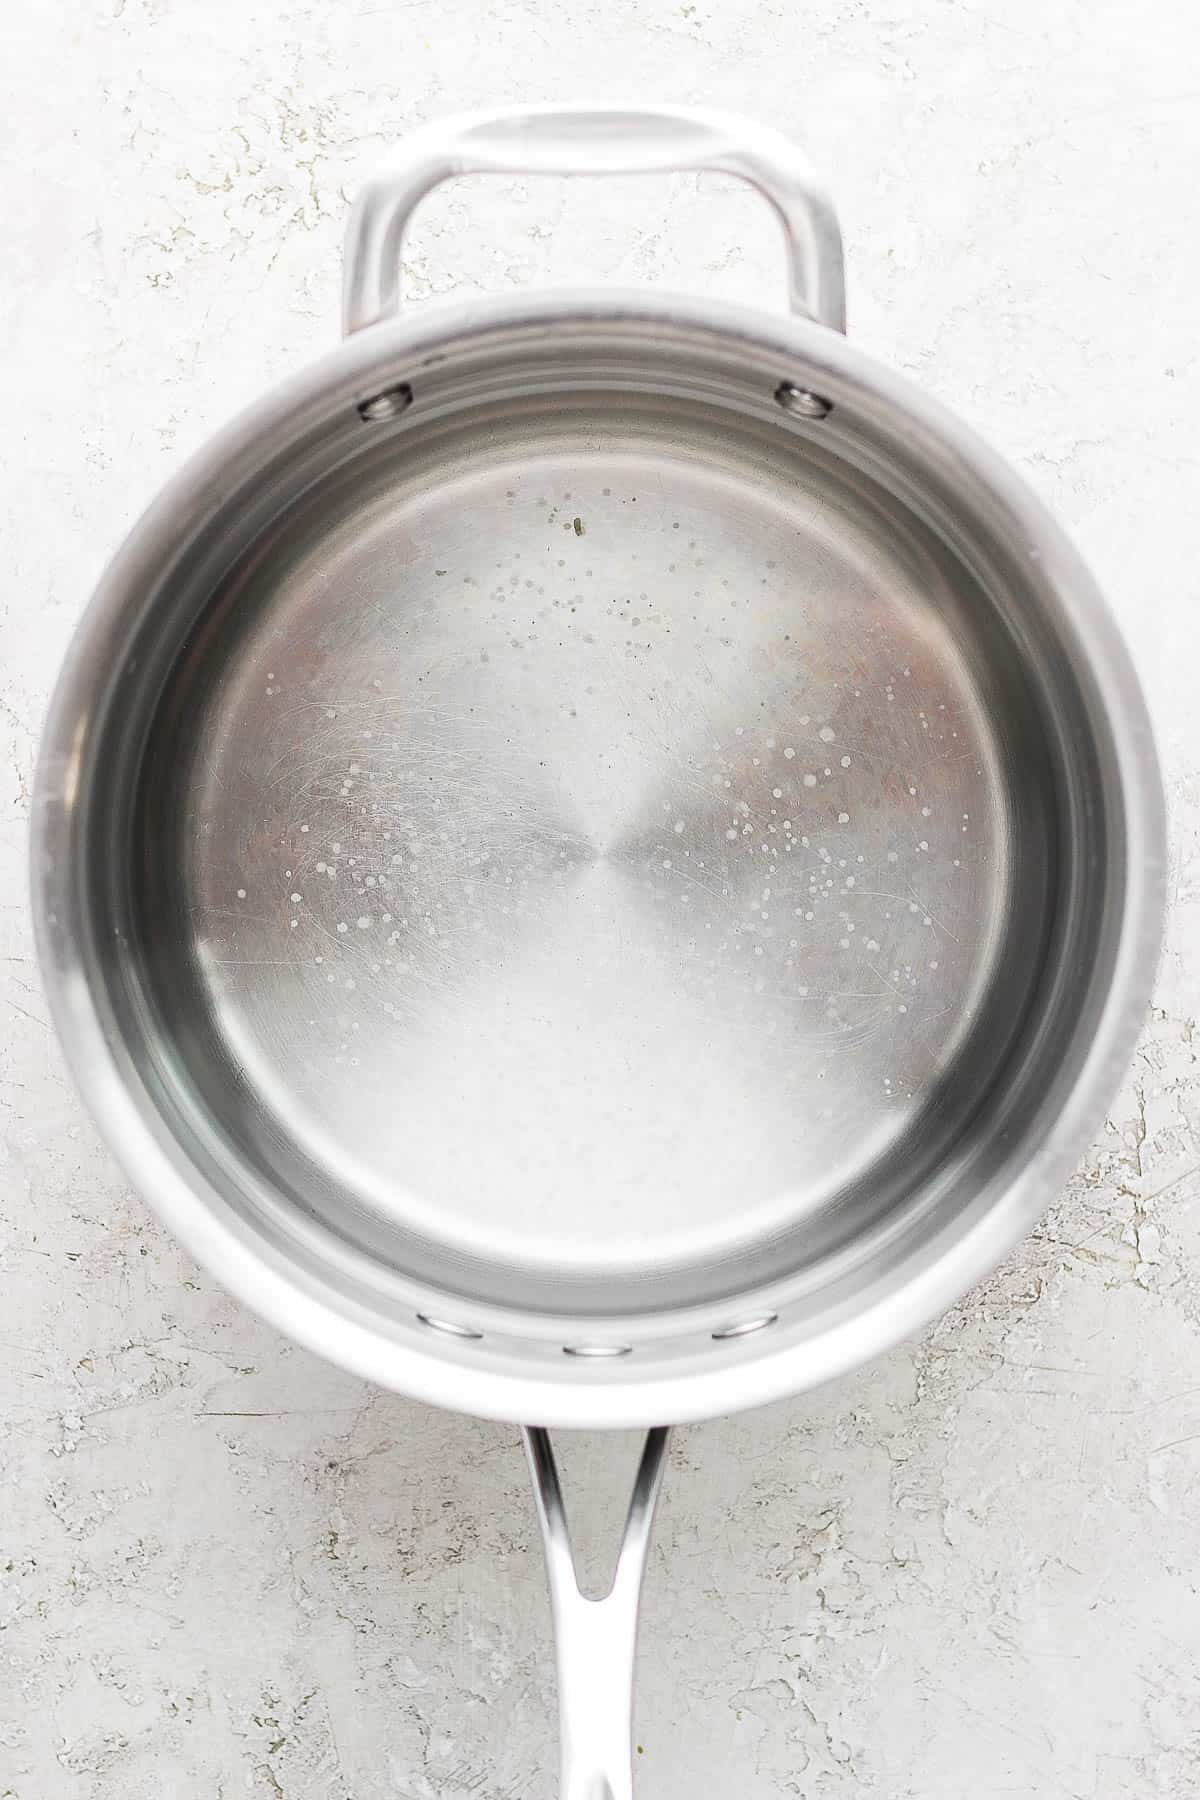 A large sauce pan fill of water.